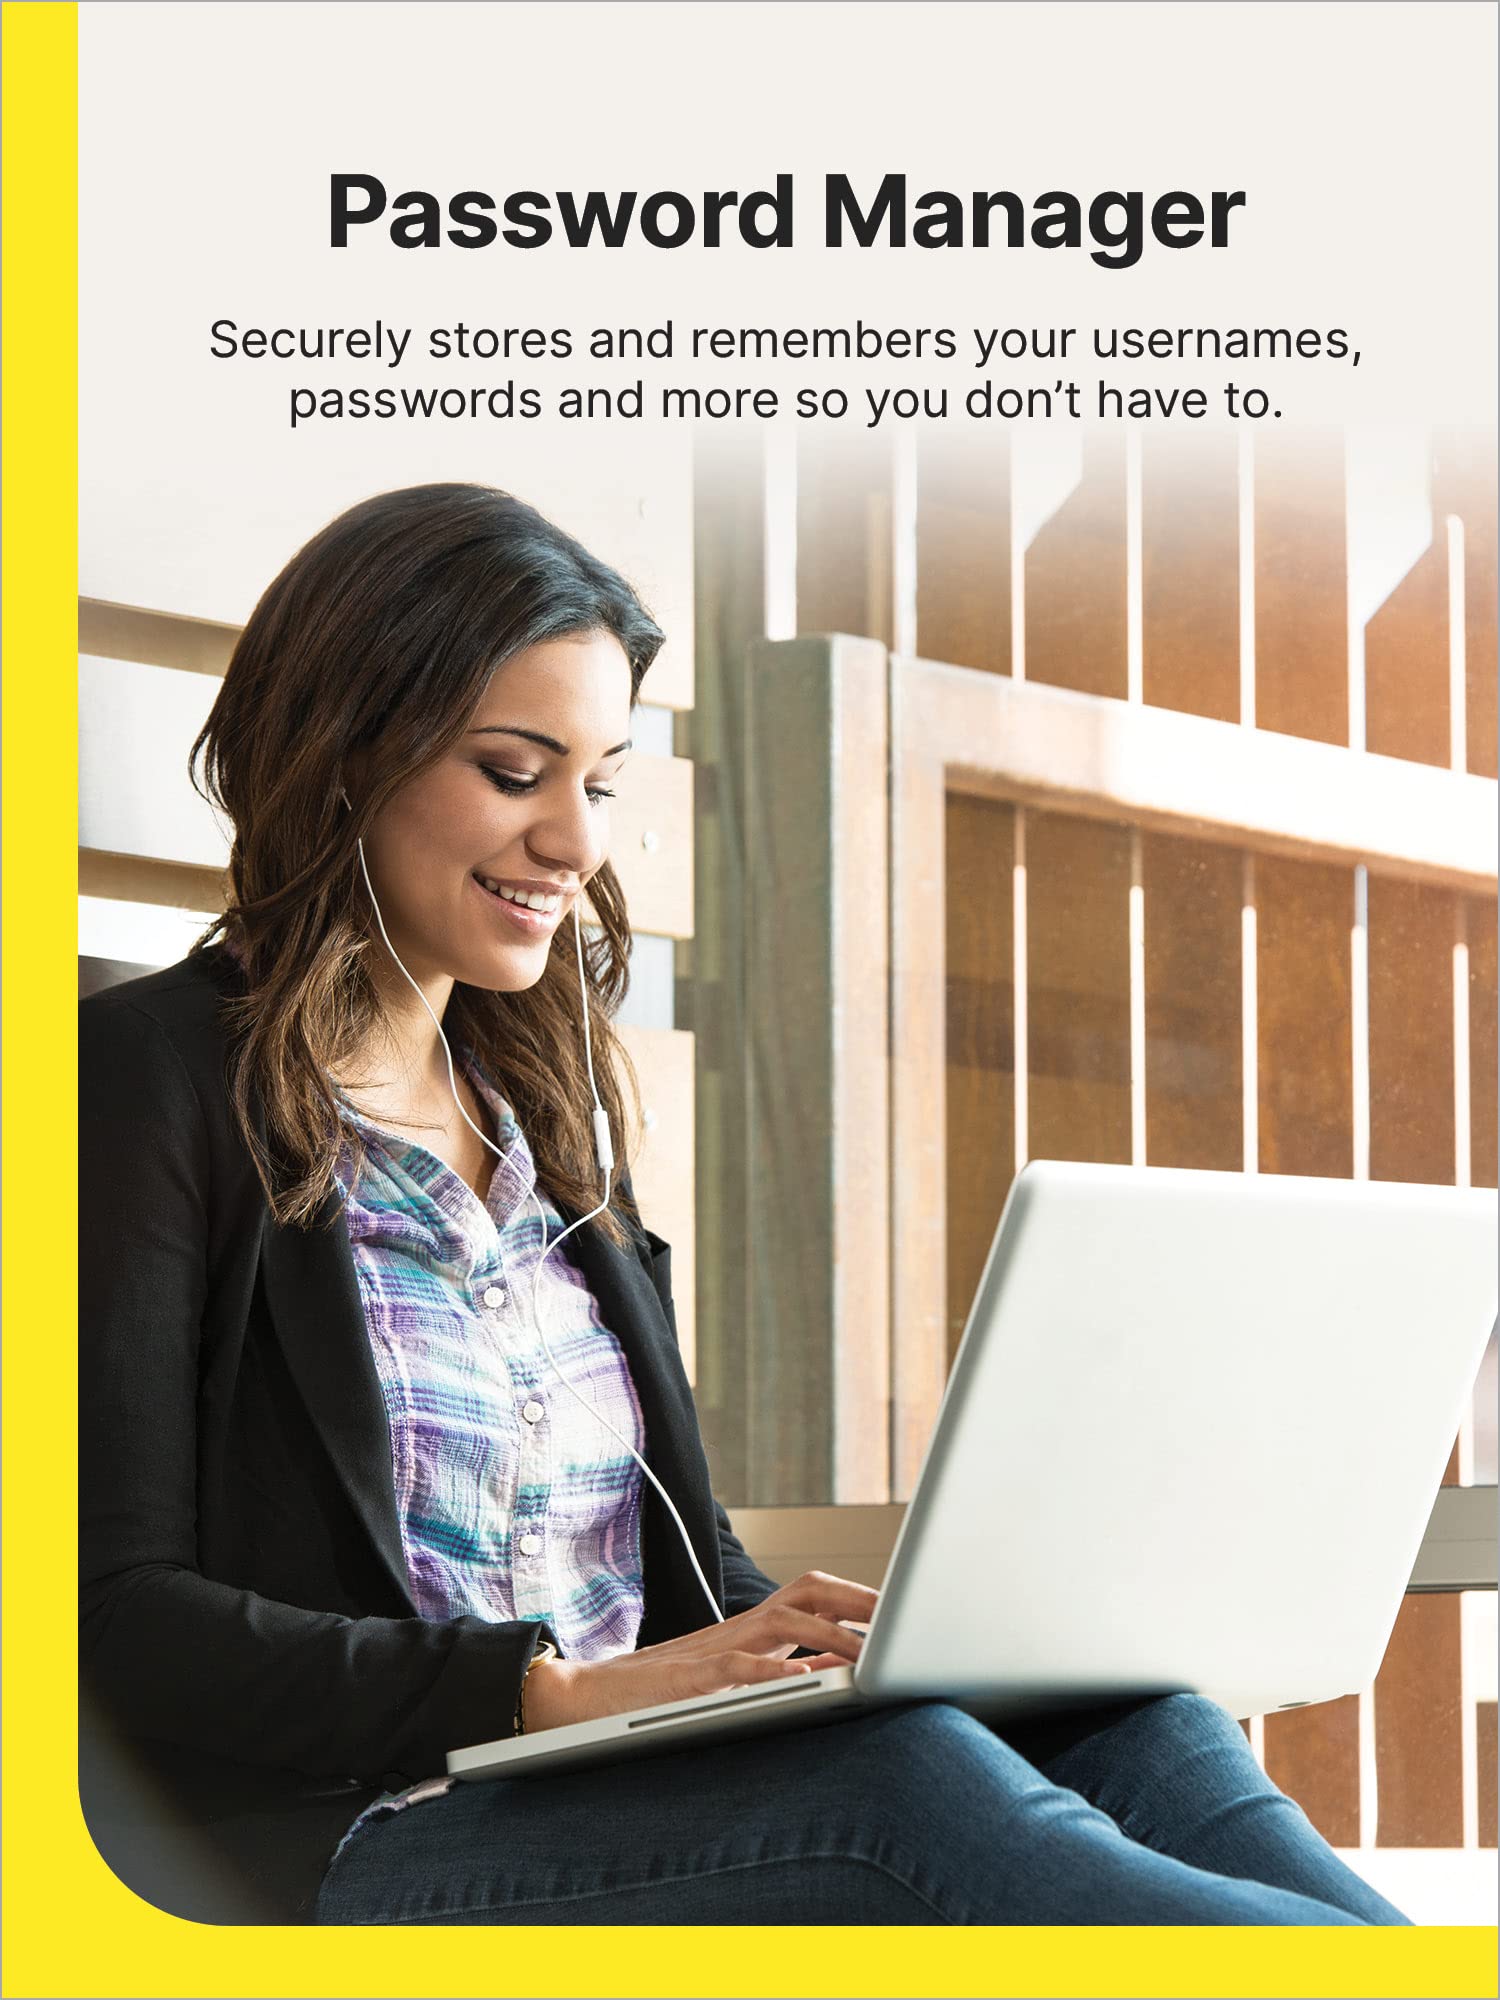 Norton 360 Premium, 2024 Ready, Antivirus software for 10 Devices with Auto Renewal - Includes VPN, PC Cloud Backup & Dark Web Monitoring [Key card]